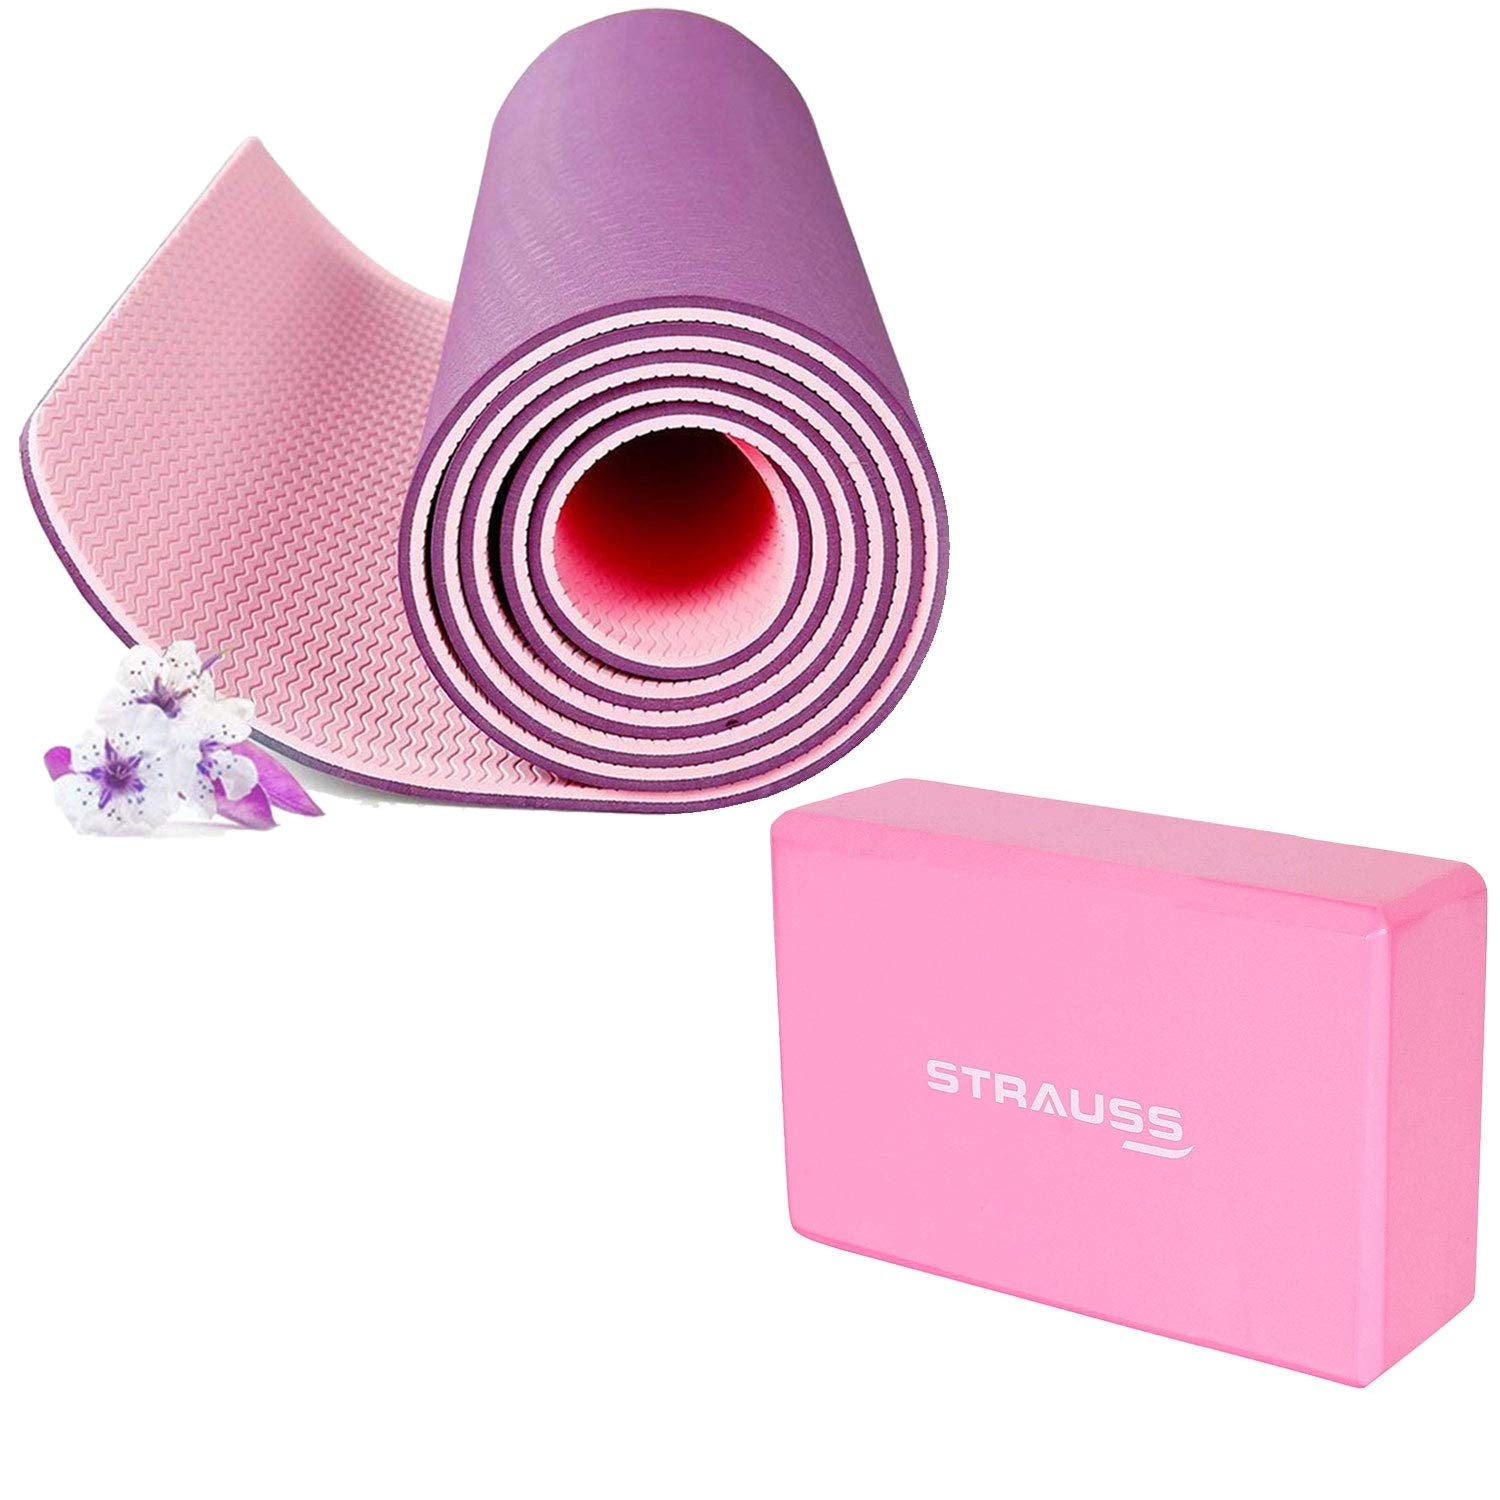 Strauss TPE Eco Friendly Dual Layer Yoga Mat, 6 mm (Pink) and Yoga Block (Pink)